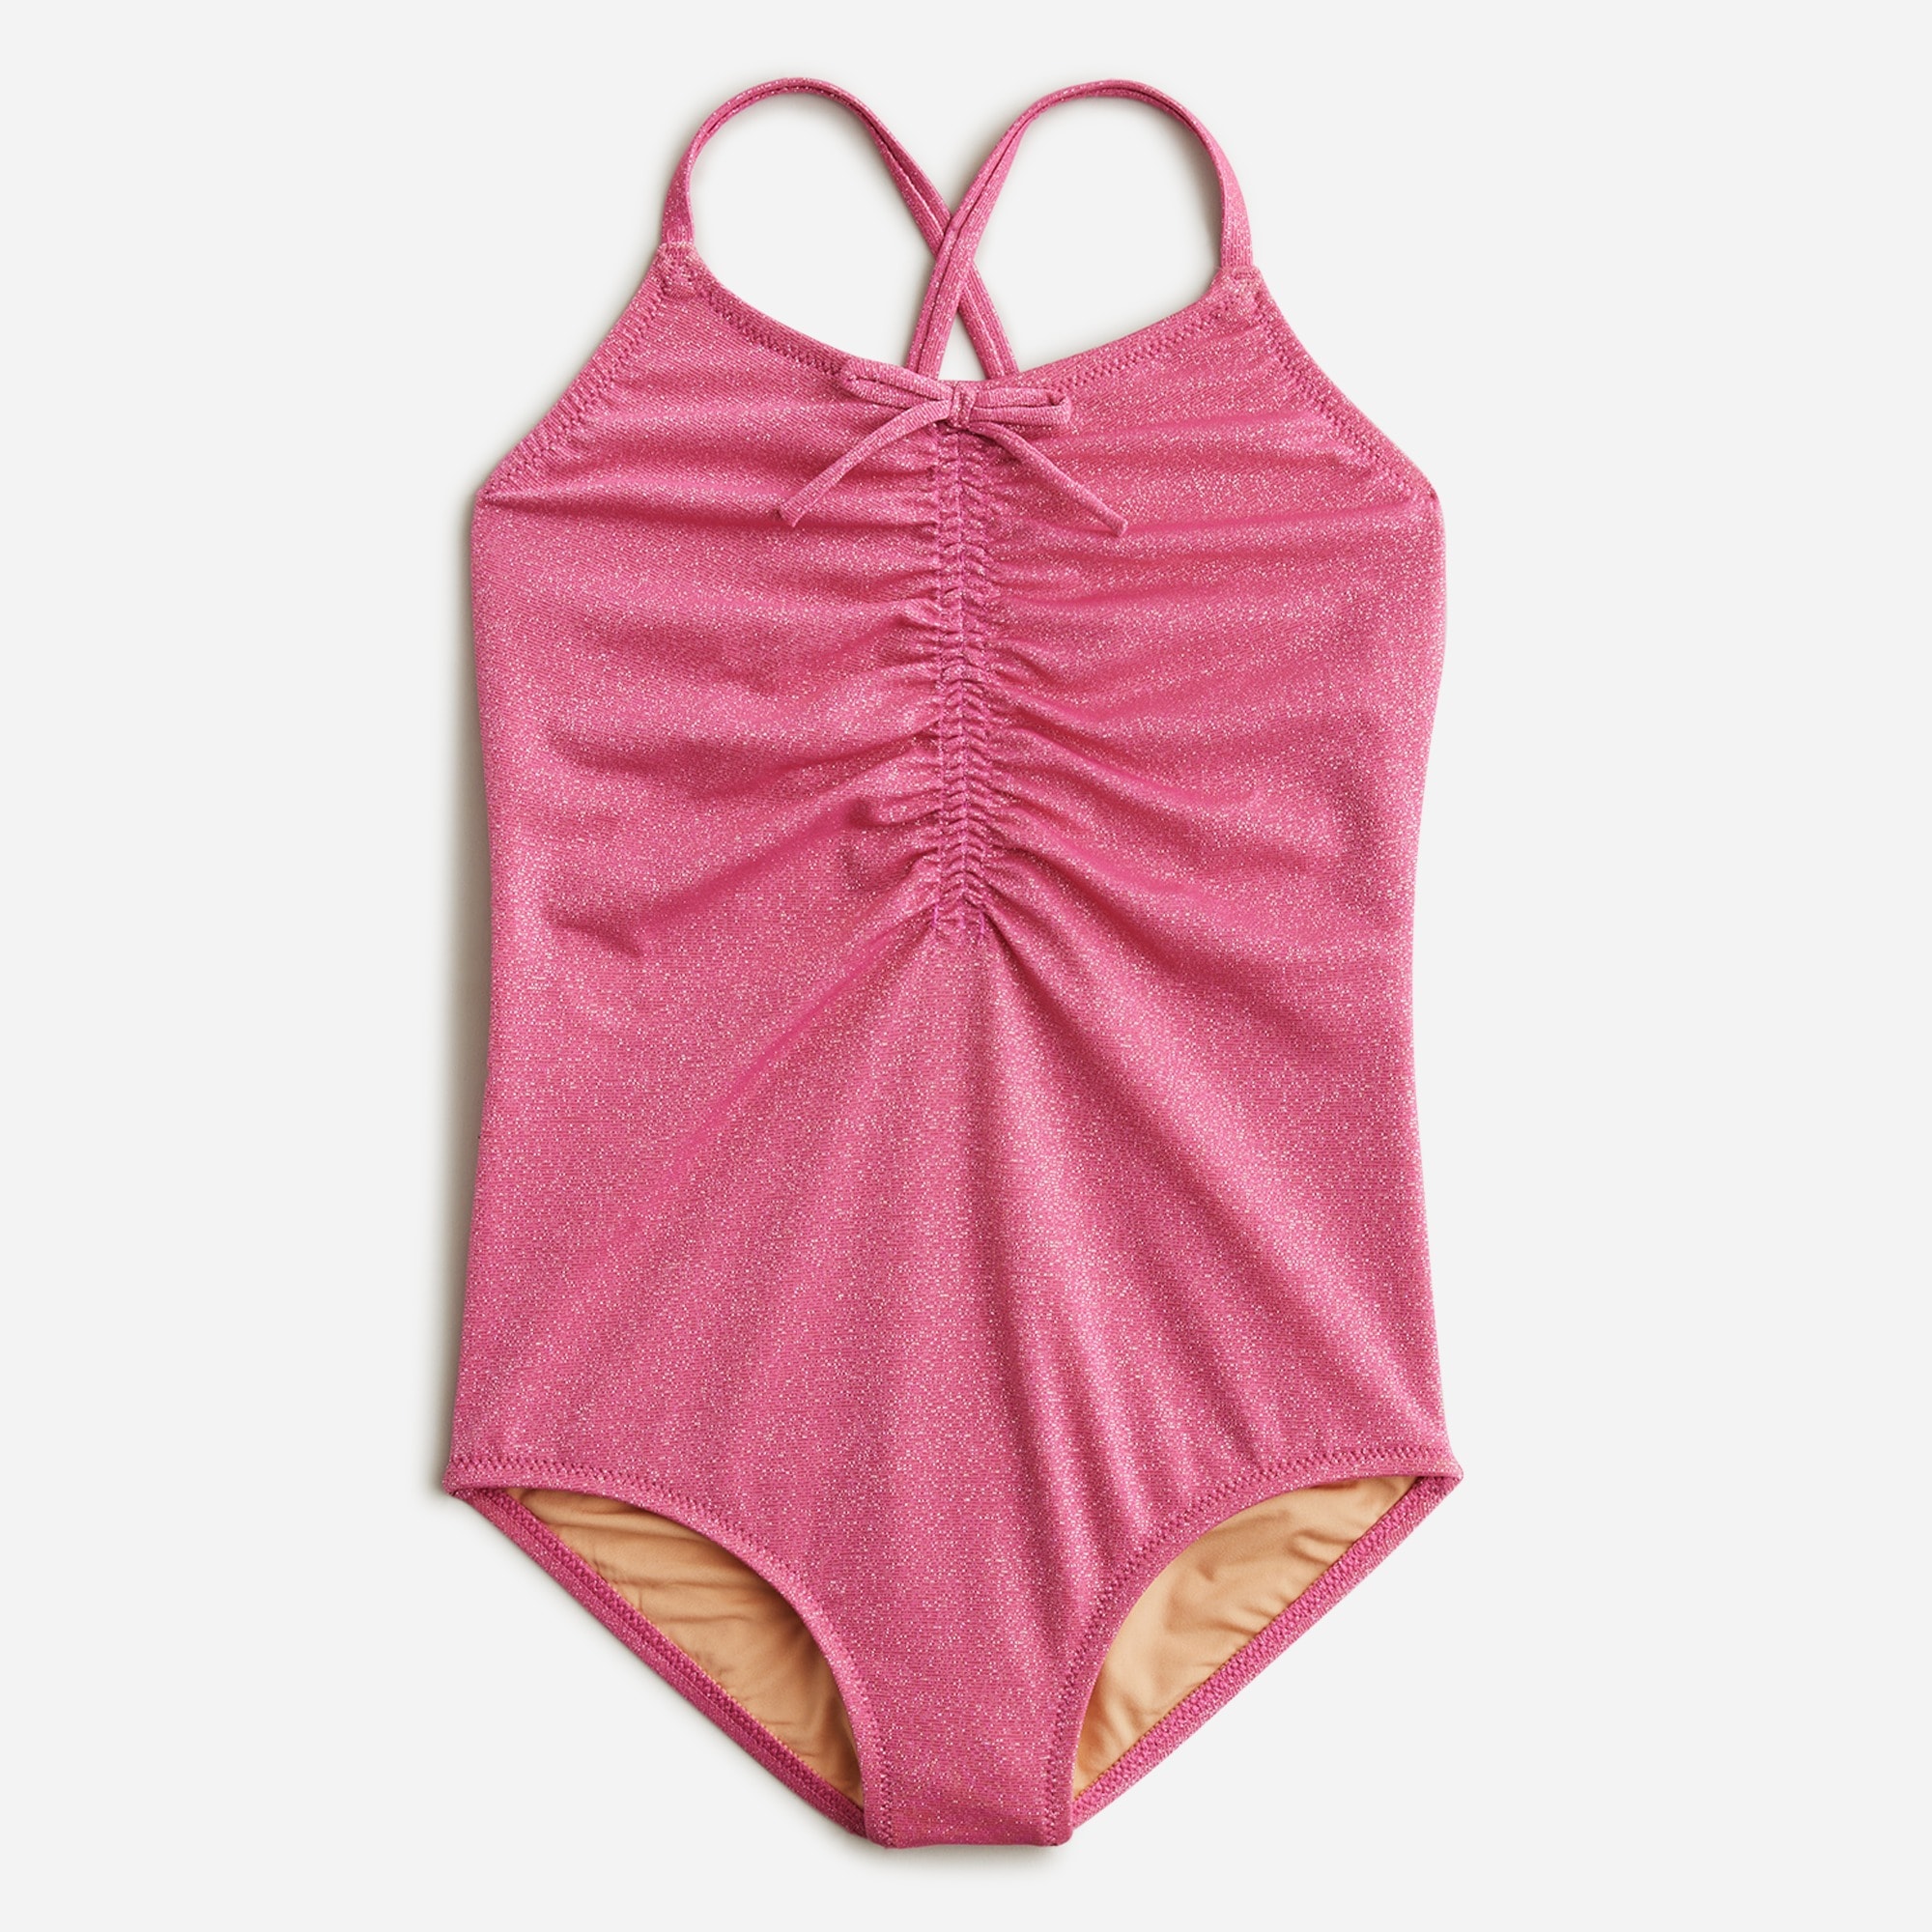  Girls' ruched shimmer one-piece swimsuit with UPF 50+